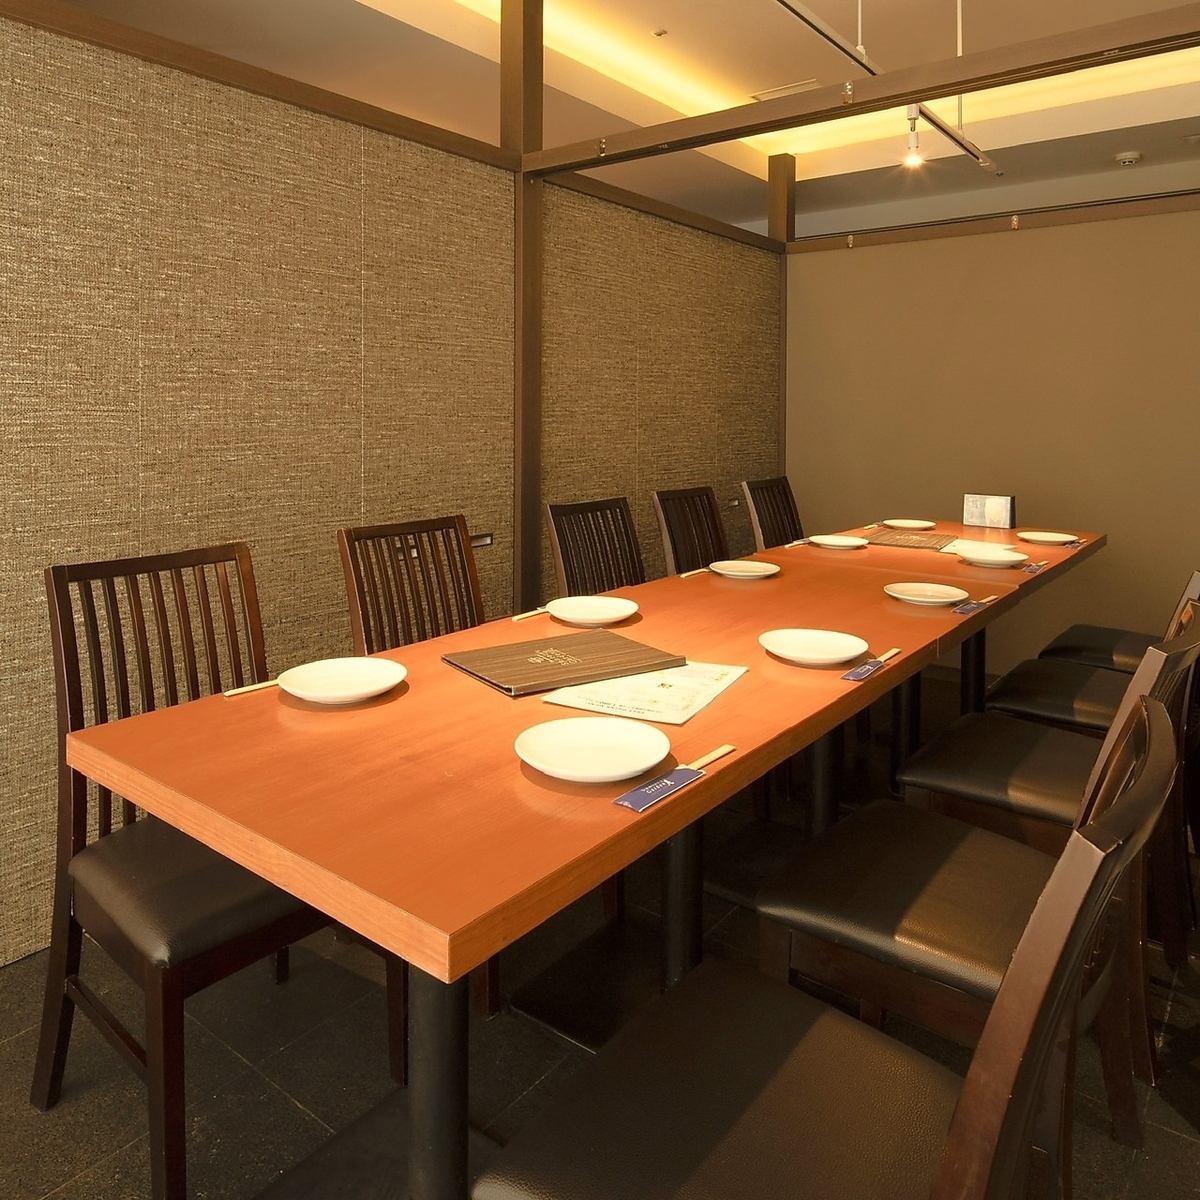 Fully equipped with private rooms♪ Recommended for various banquets and after-parties! Can accommodate up to 100 people!